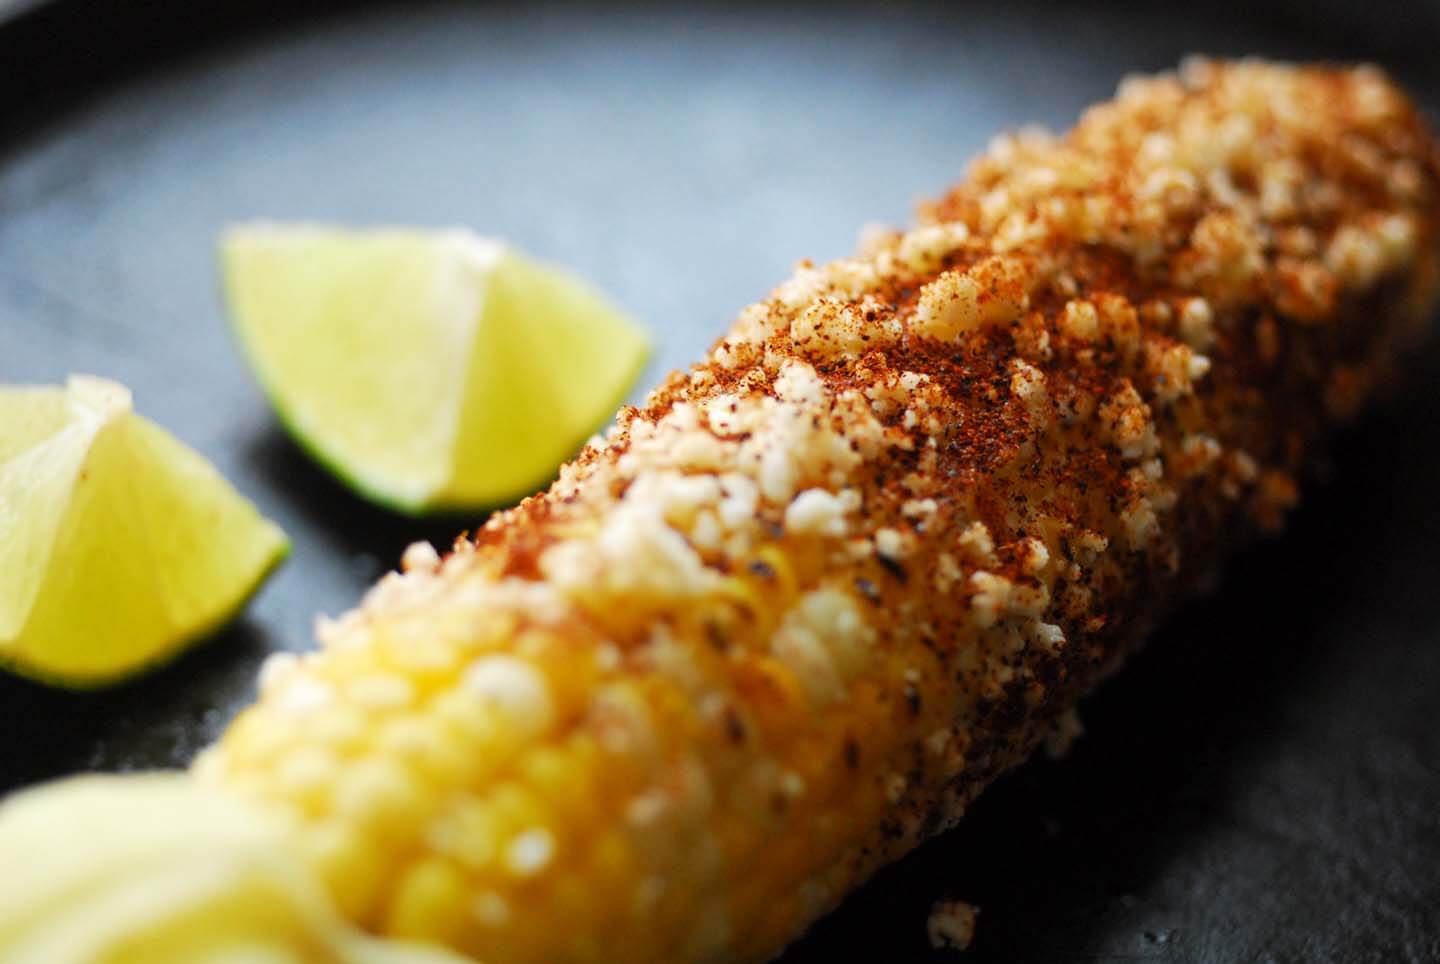 Mexican Corn On The Cob A Light In August Homesick Texan,Coin Stores